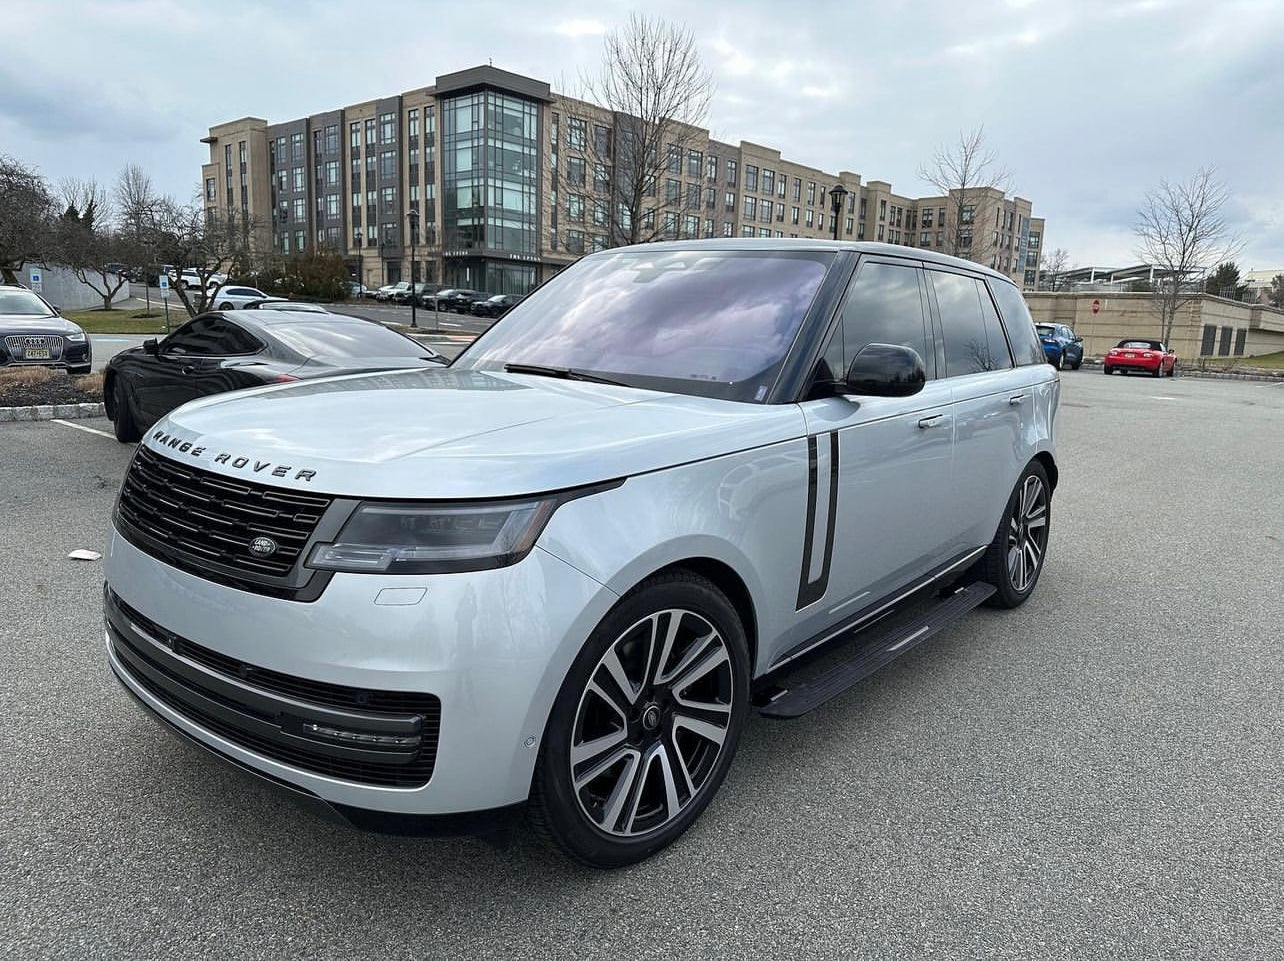 2023 LAND ROVER RANGE ROVER BIG BODY $0 Down Lease Driveway Delivery!